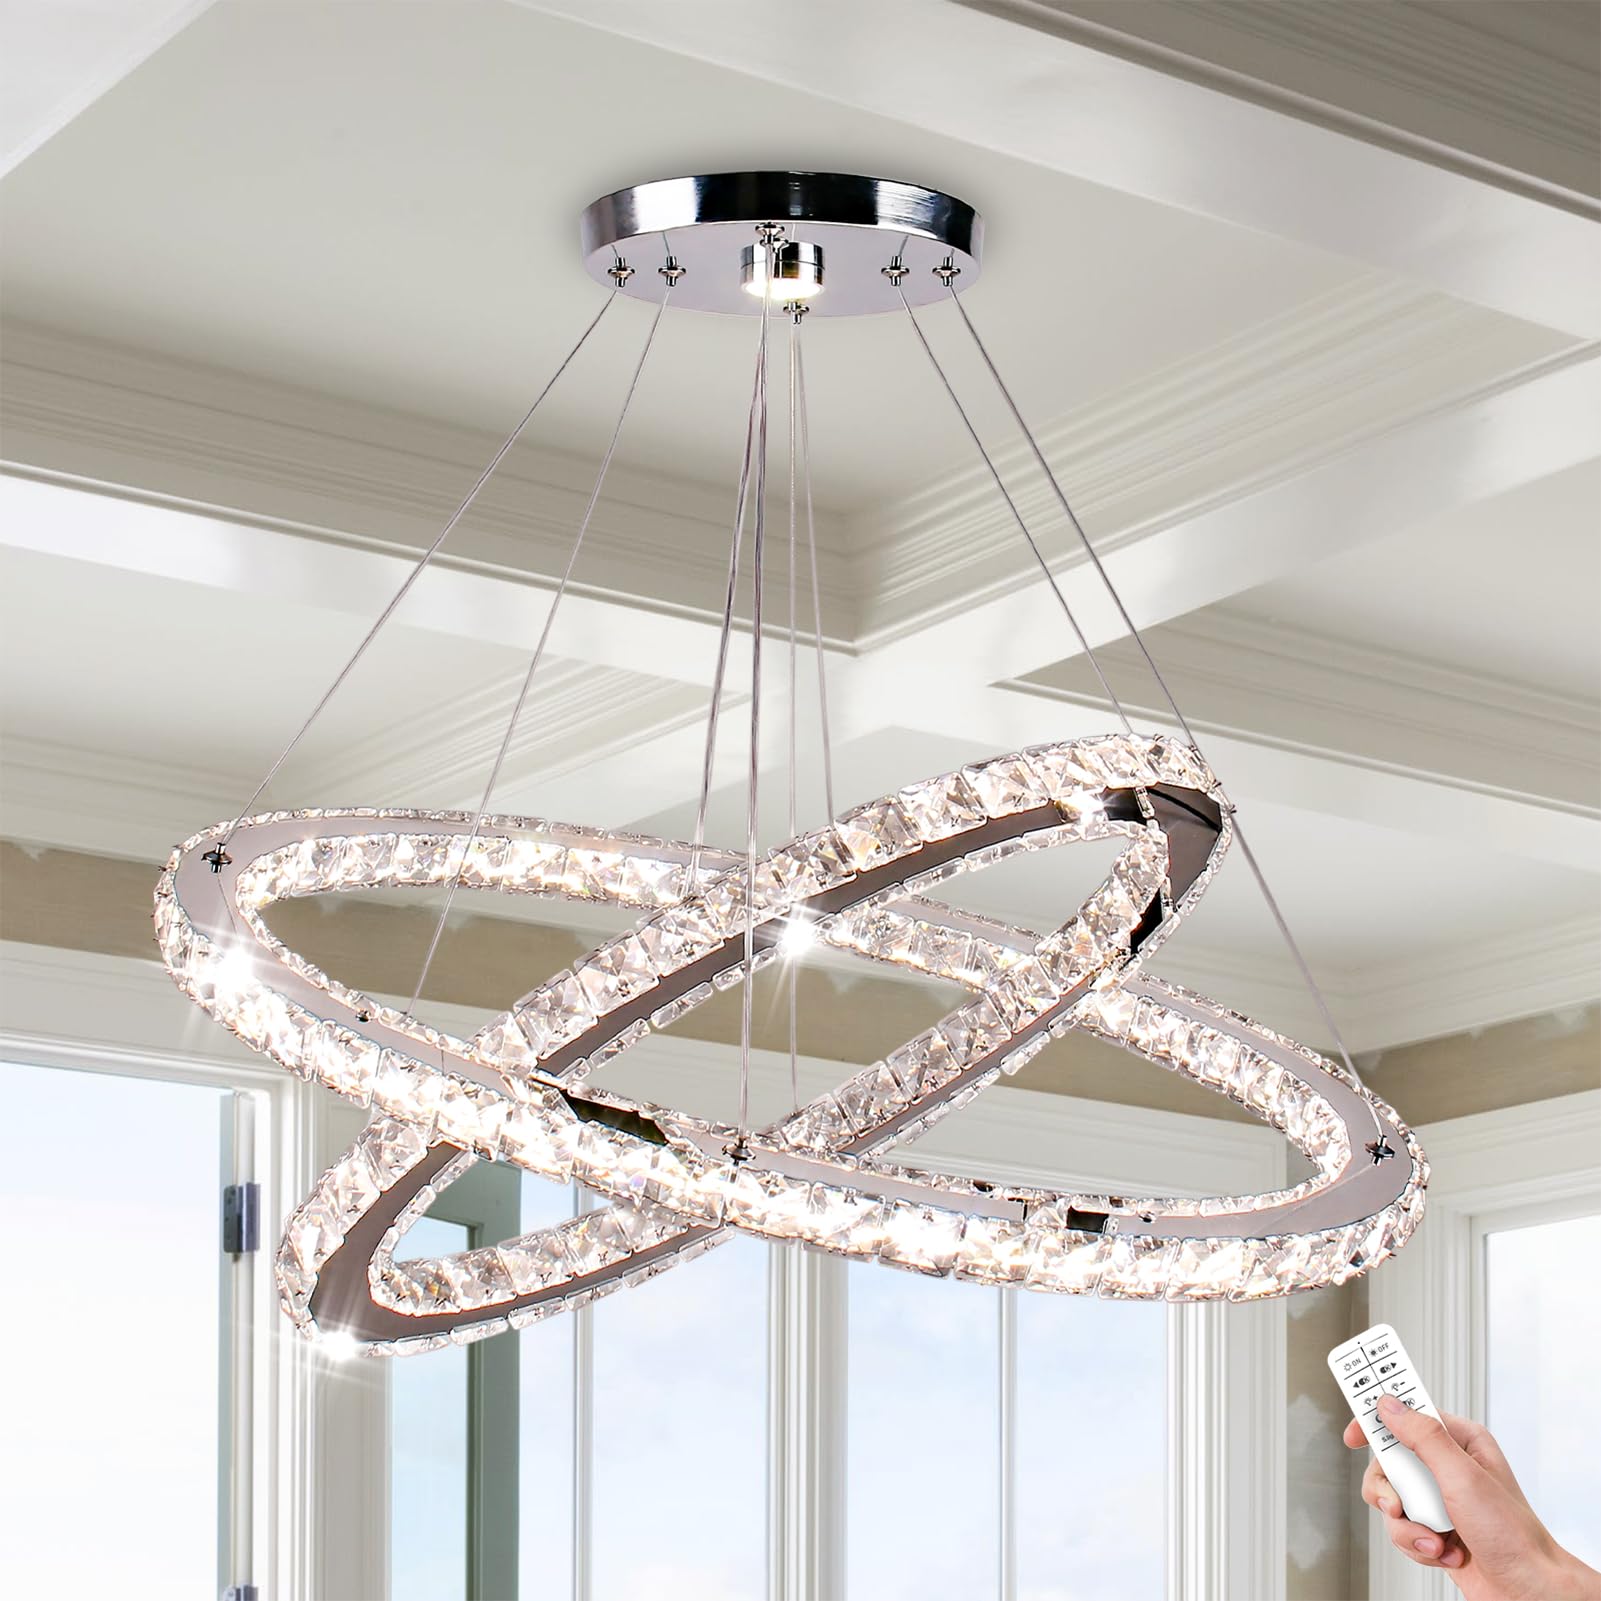 Finktonglan Dimmable Crystal Chandelier, 23.6'' Oval 2 Rings Modern Chandeliers with Remote Control, LED Linear Chandelier Pendant Island Light for Kitchen Dining Room Living Room Bedroom